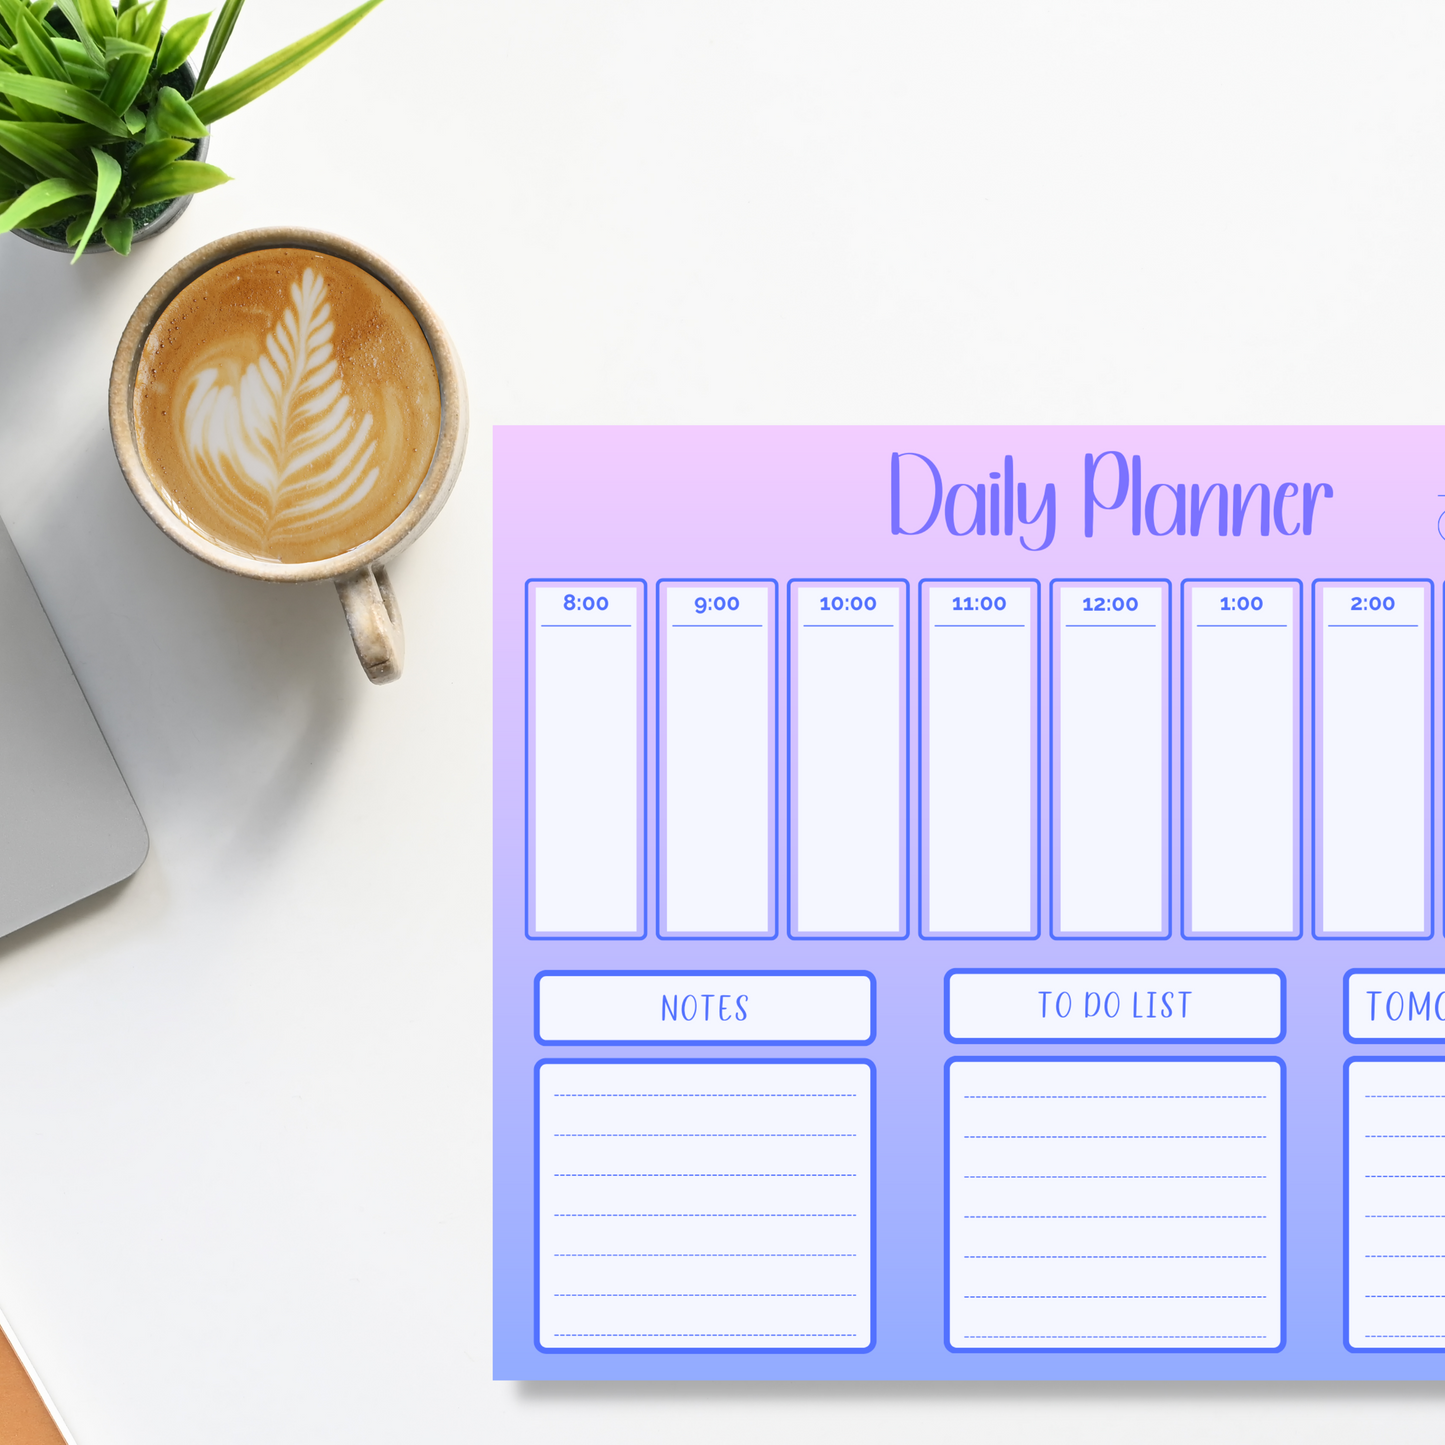 Daily Planner Notepads (8.5 x 11)